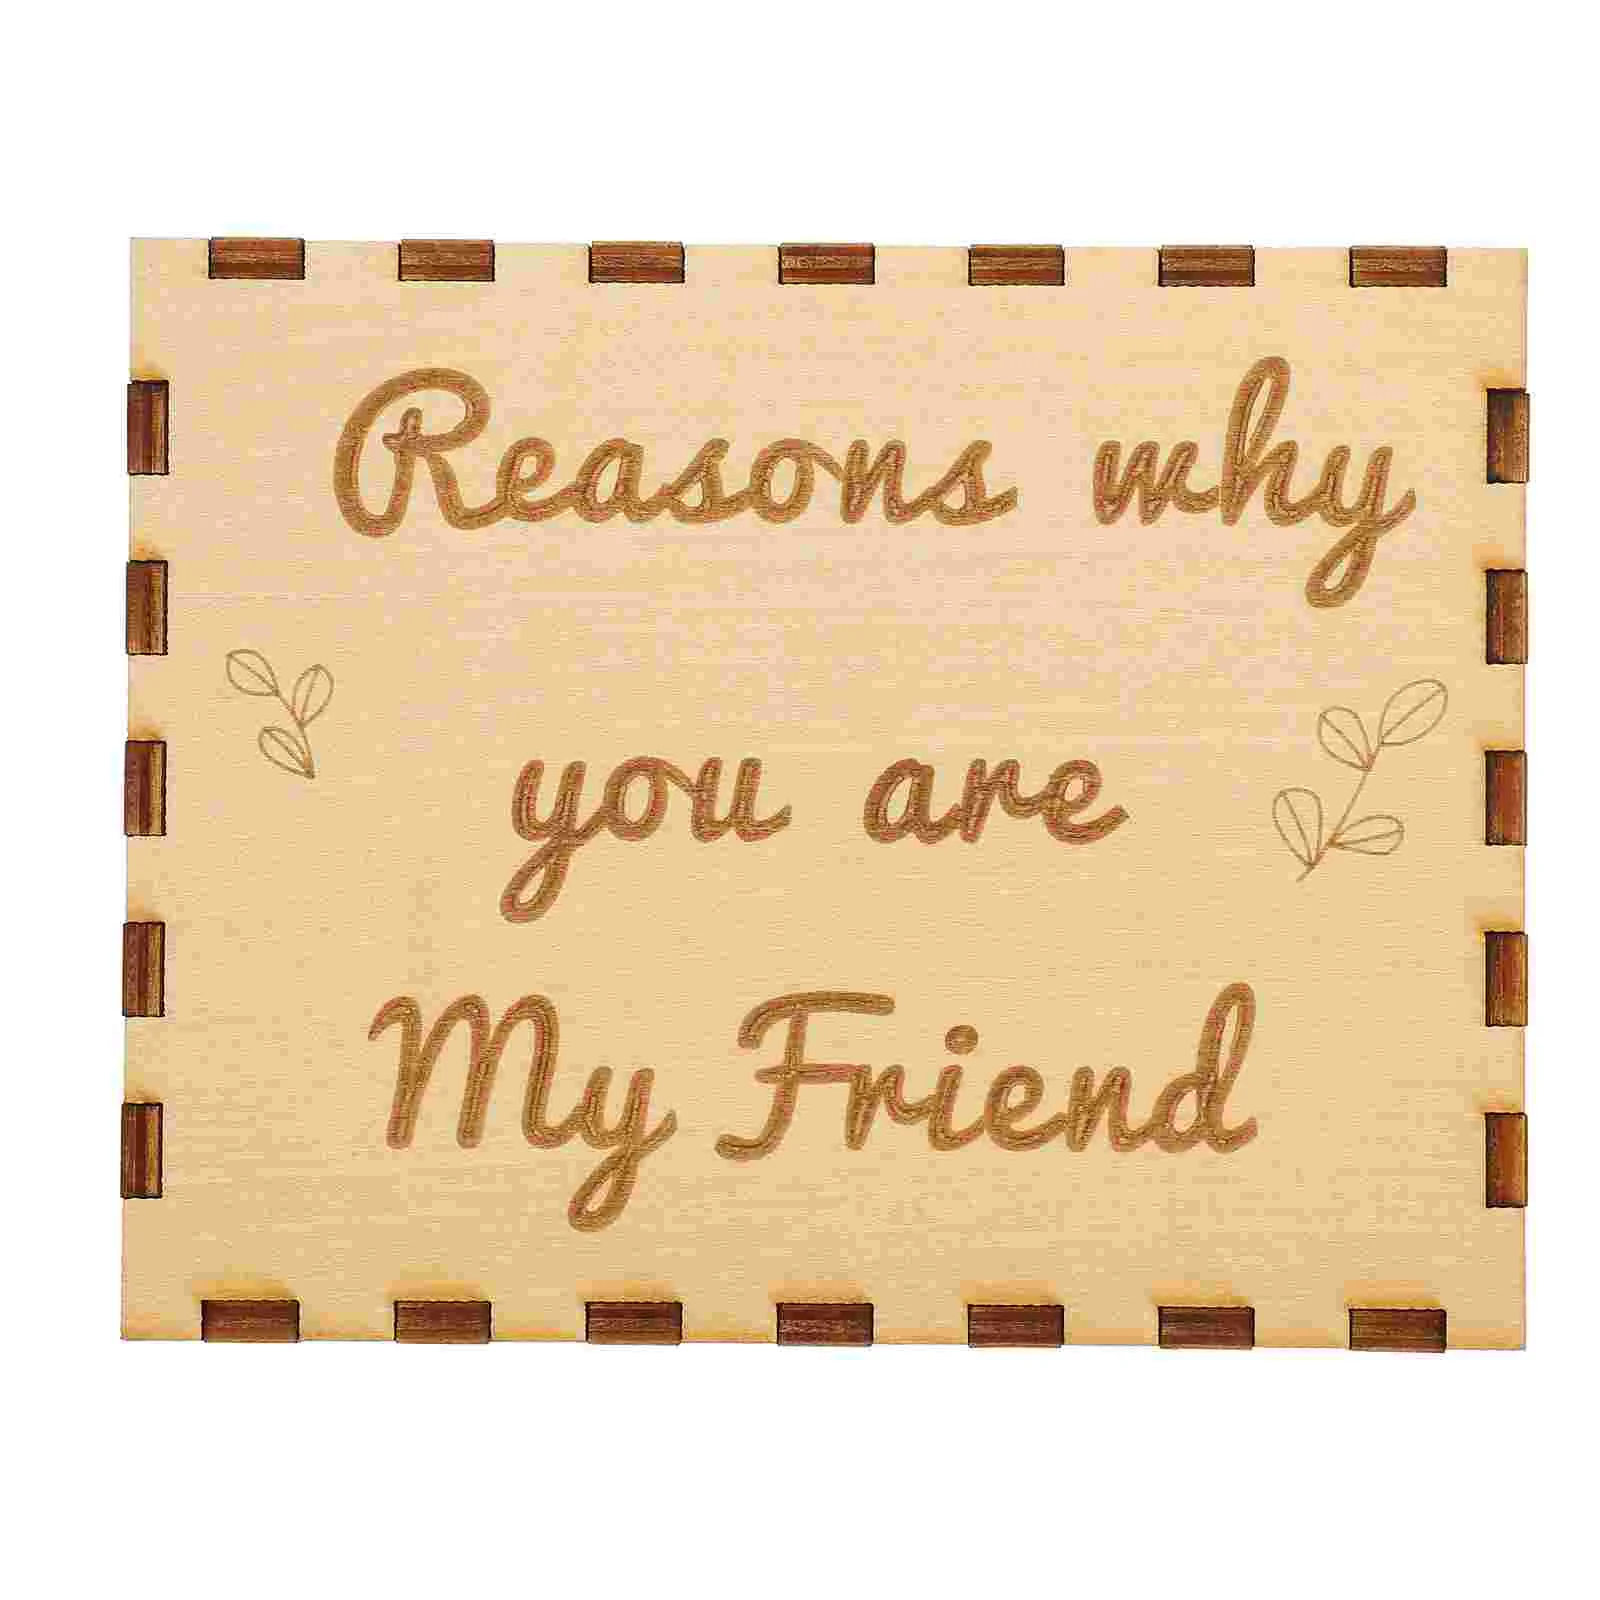 

1 Set Friendship Appreciation Gift Box Wood Keepsake Box with Wood Heart Slices for Friends